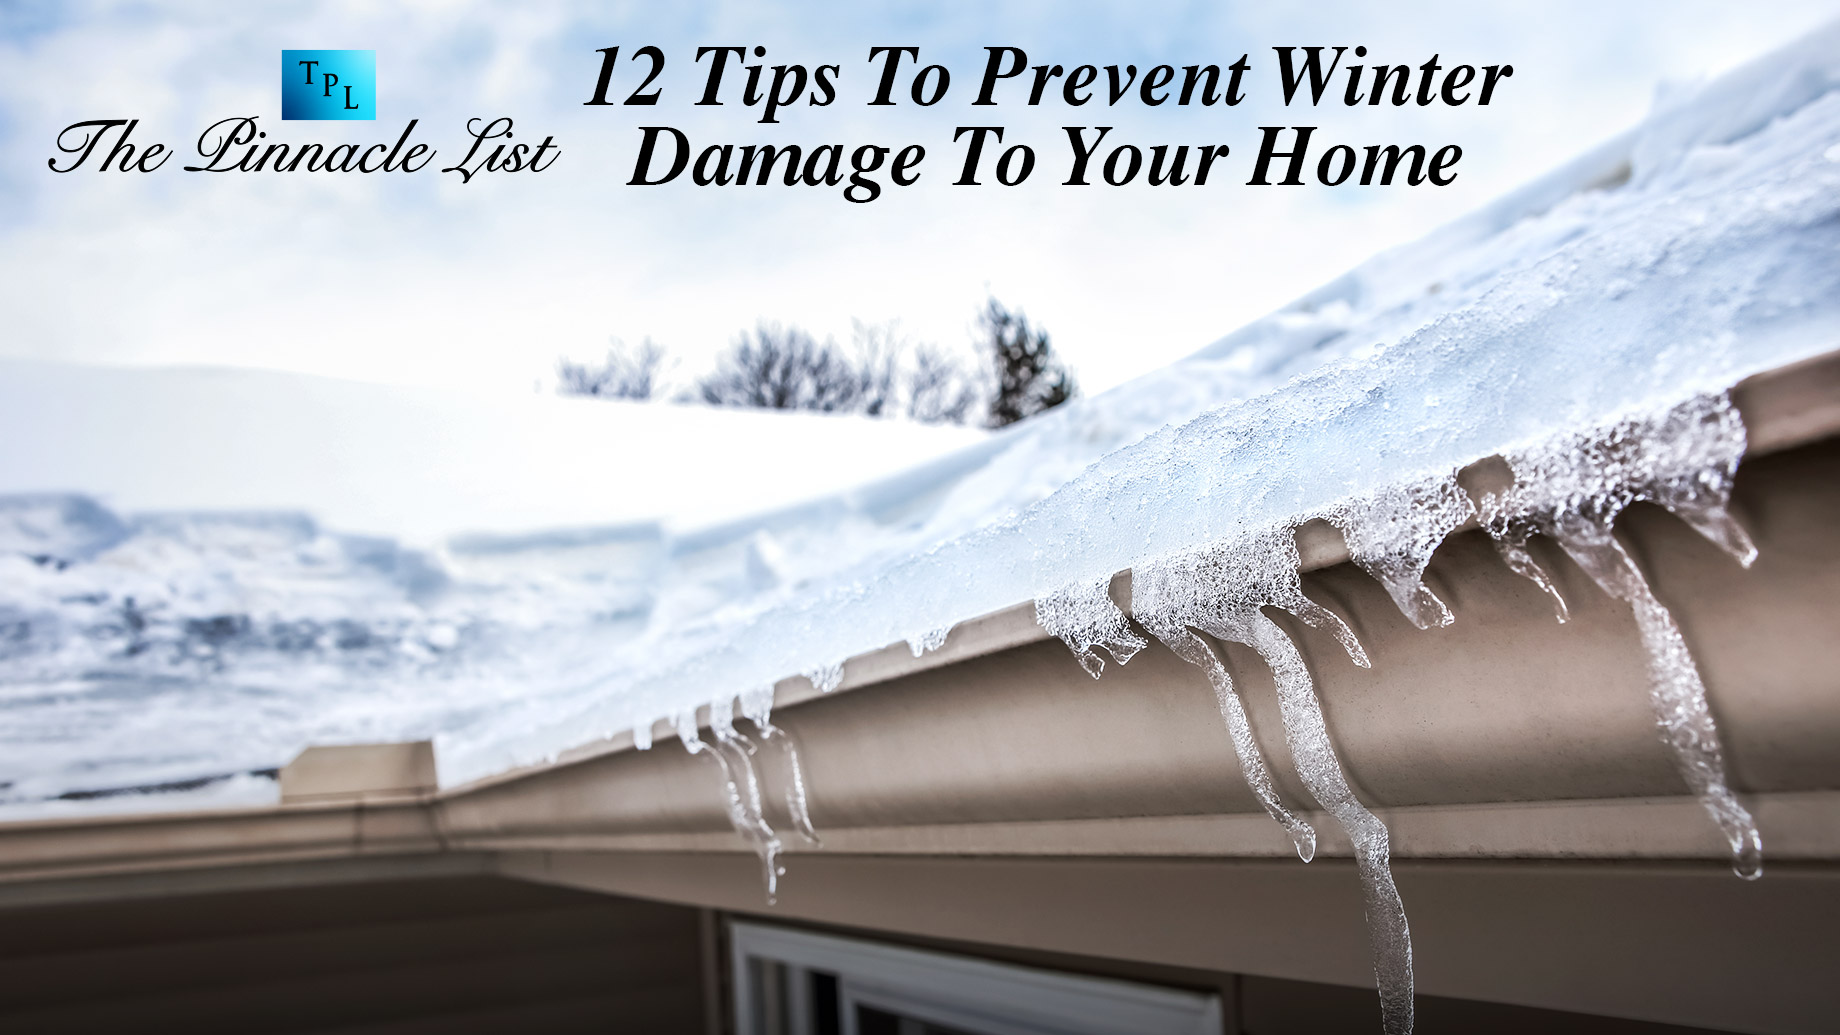 12 Tips To Prevent Winter Damage To Your Home